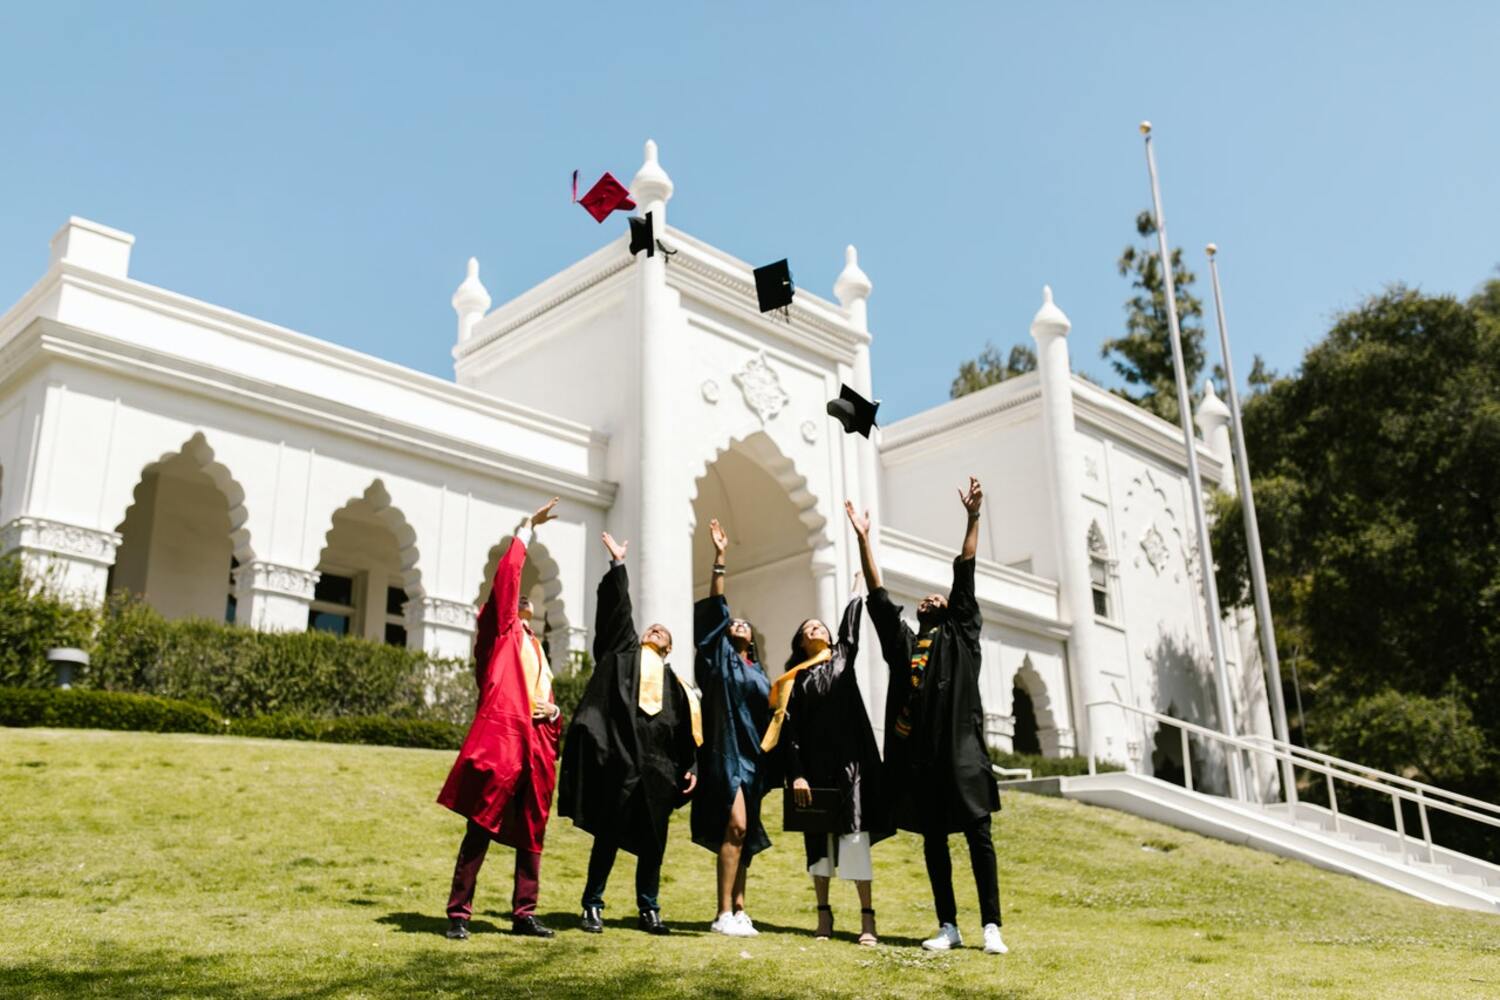 College students in caps and gowns standing outside a college celebrating by throwing caps in the air